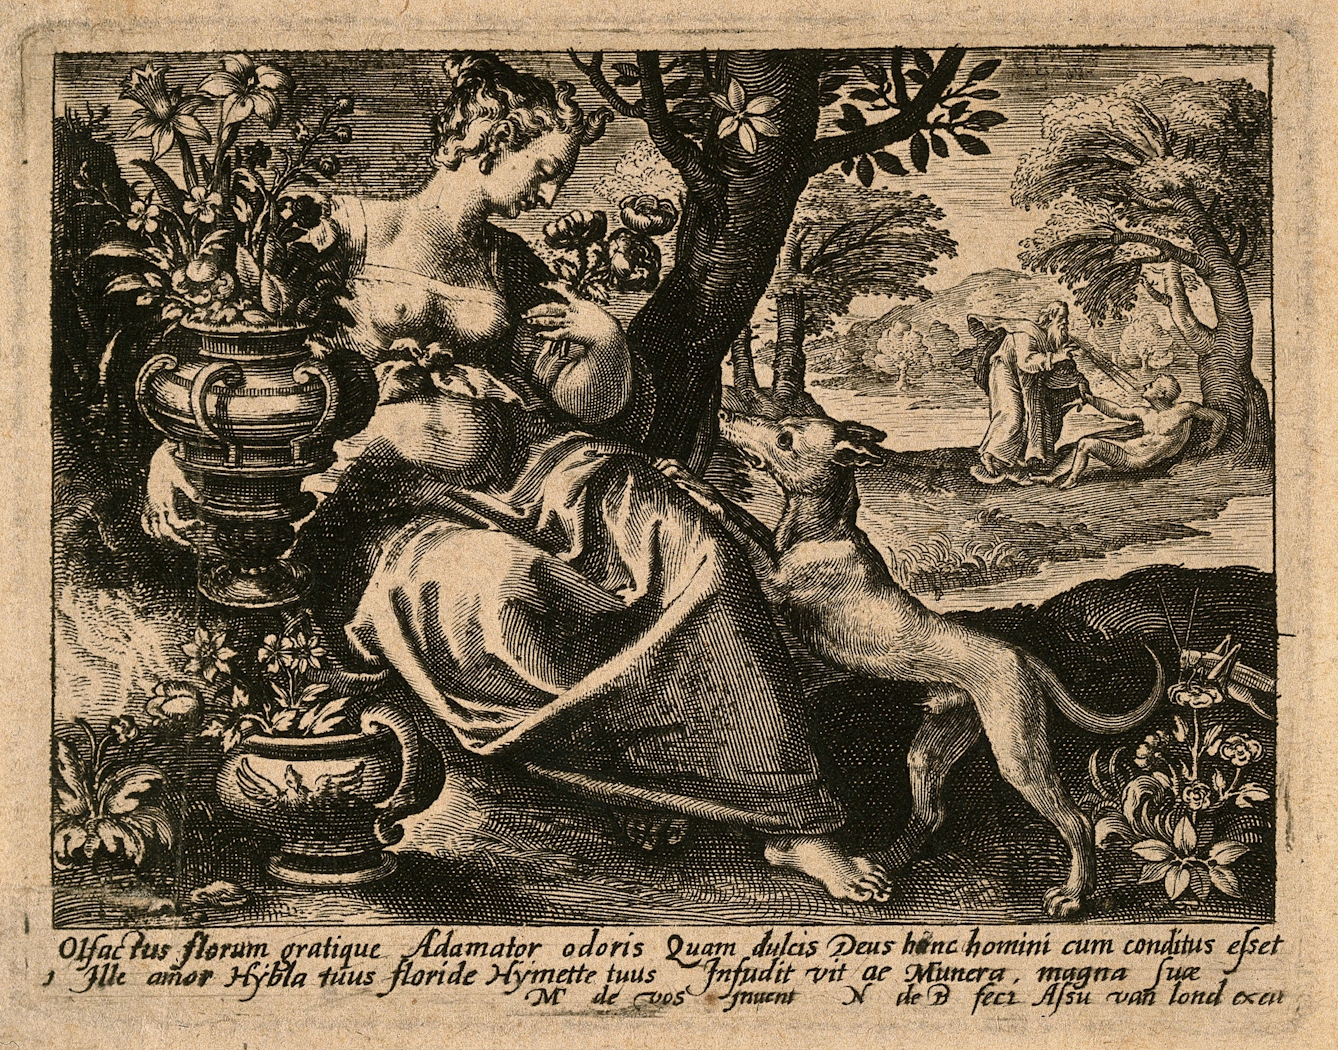 Engraving of a woman in a garden with some flowers, as God blows spirit into Adam's body. The dog is a symbol of the sense of smell. 